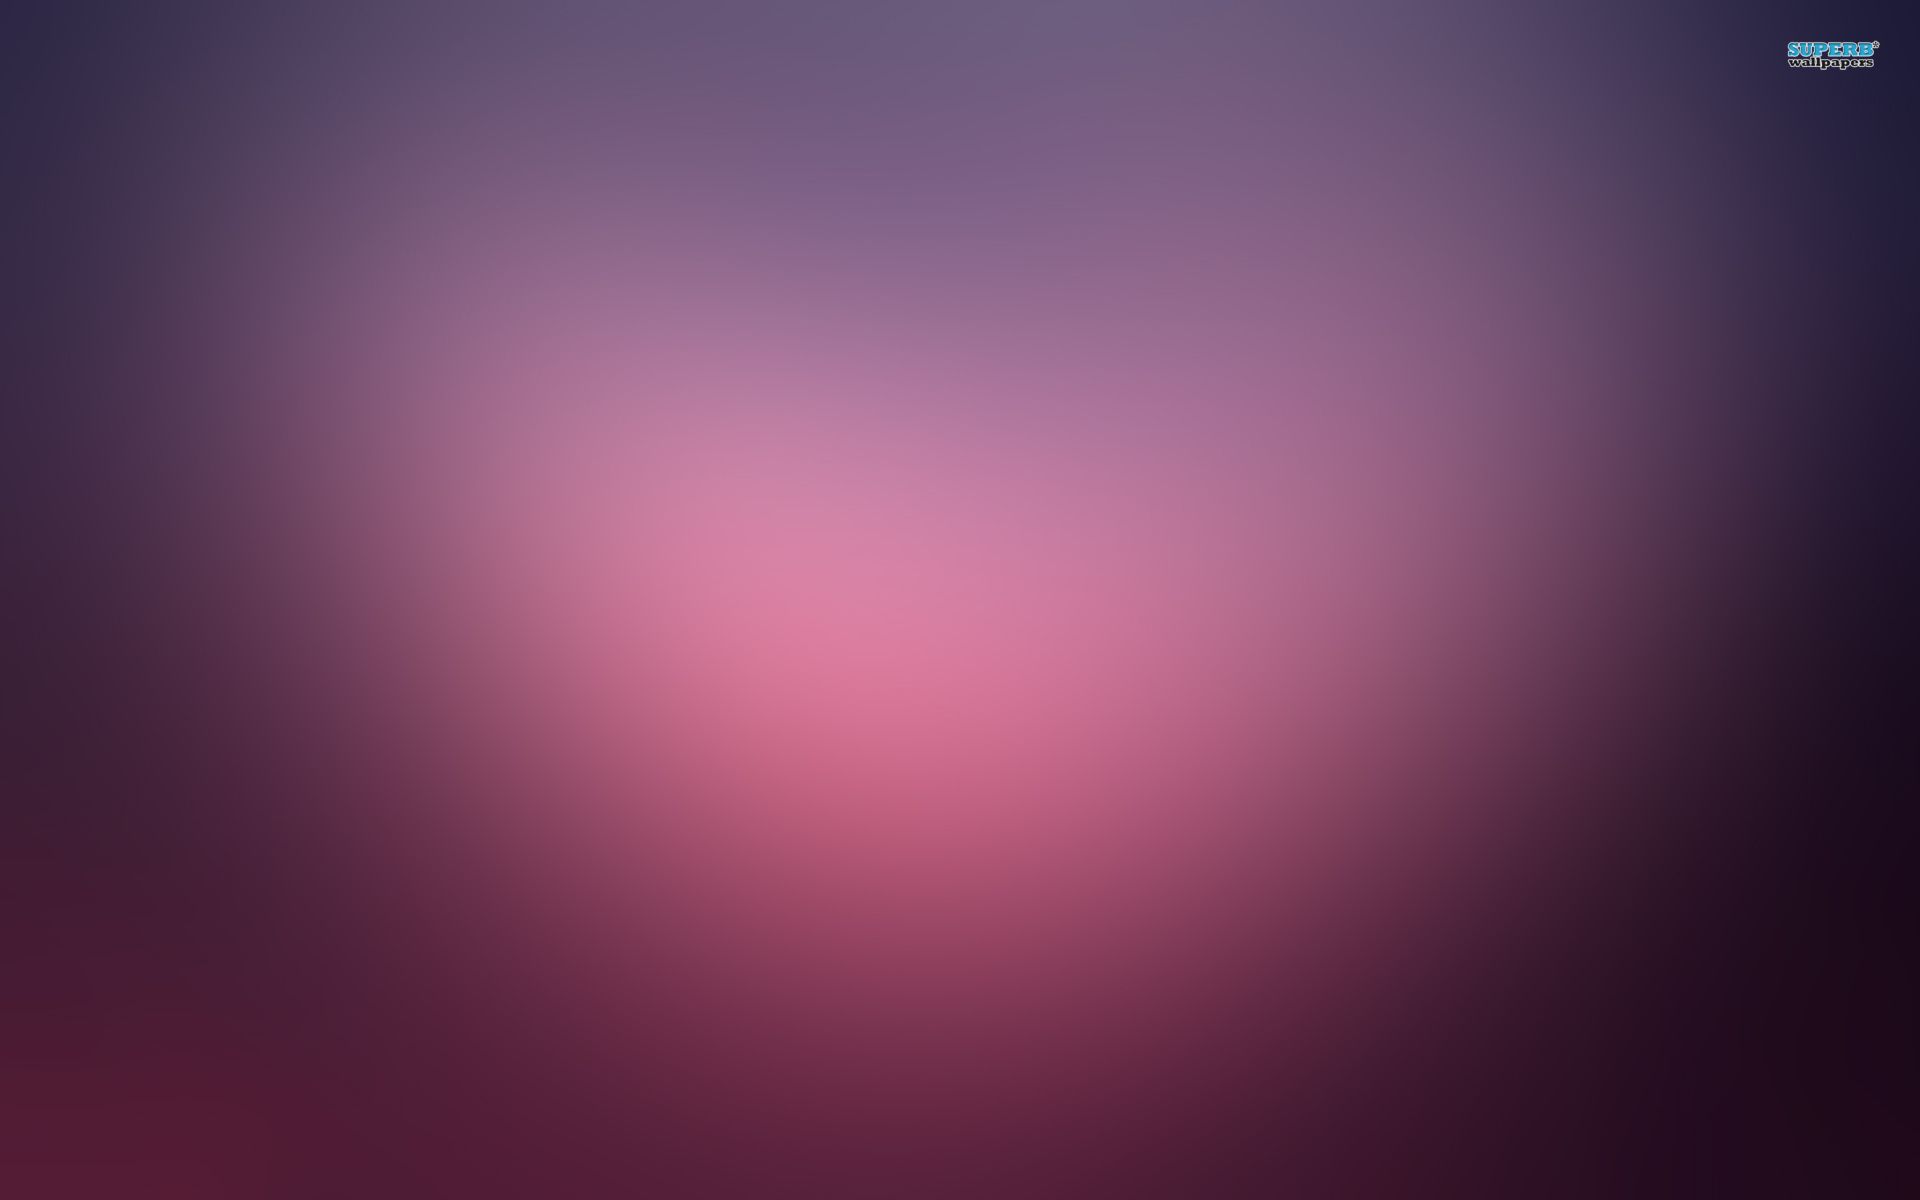 Simple wallpaper - Abstract wallpapers - #3870